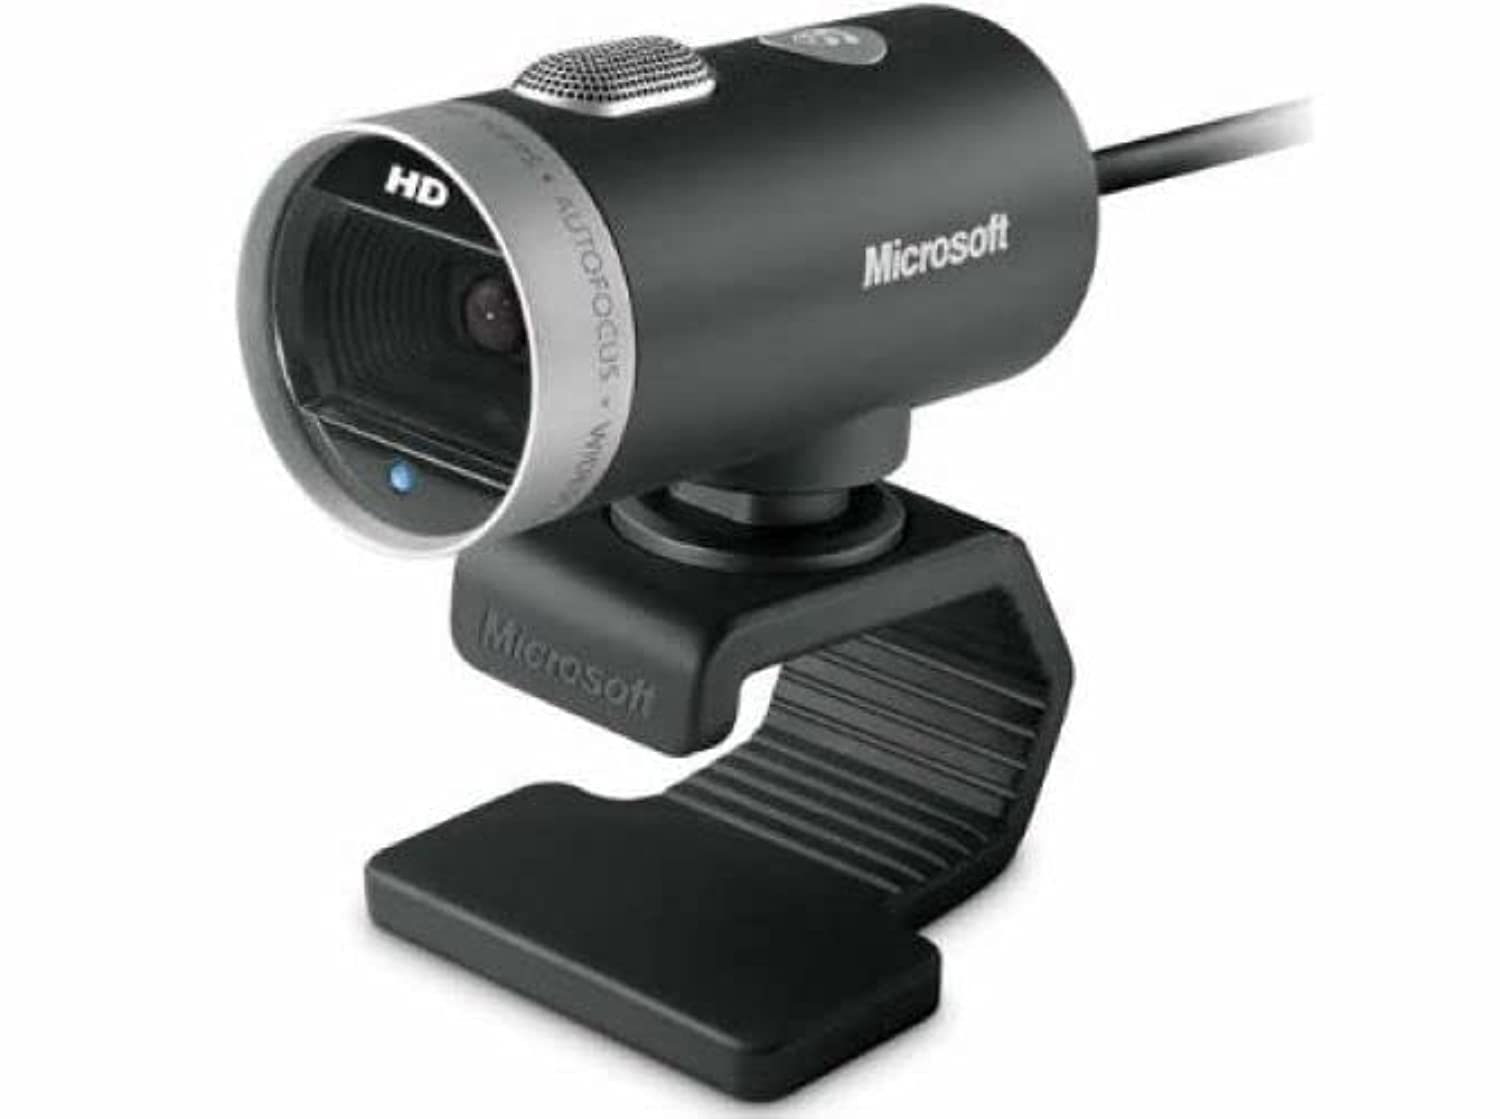 Microsoft LifeCam Cinema Webcam for Business - Black with built-in noise cancelling Microphone, Light Correction, USB Connectivity, for video calling on  Teams/Zoom, Windows 8/10/11